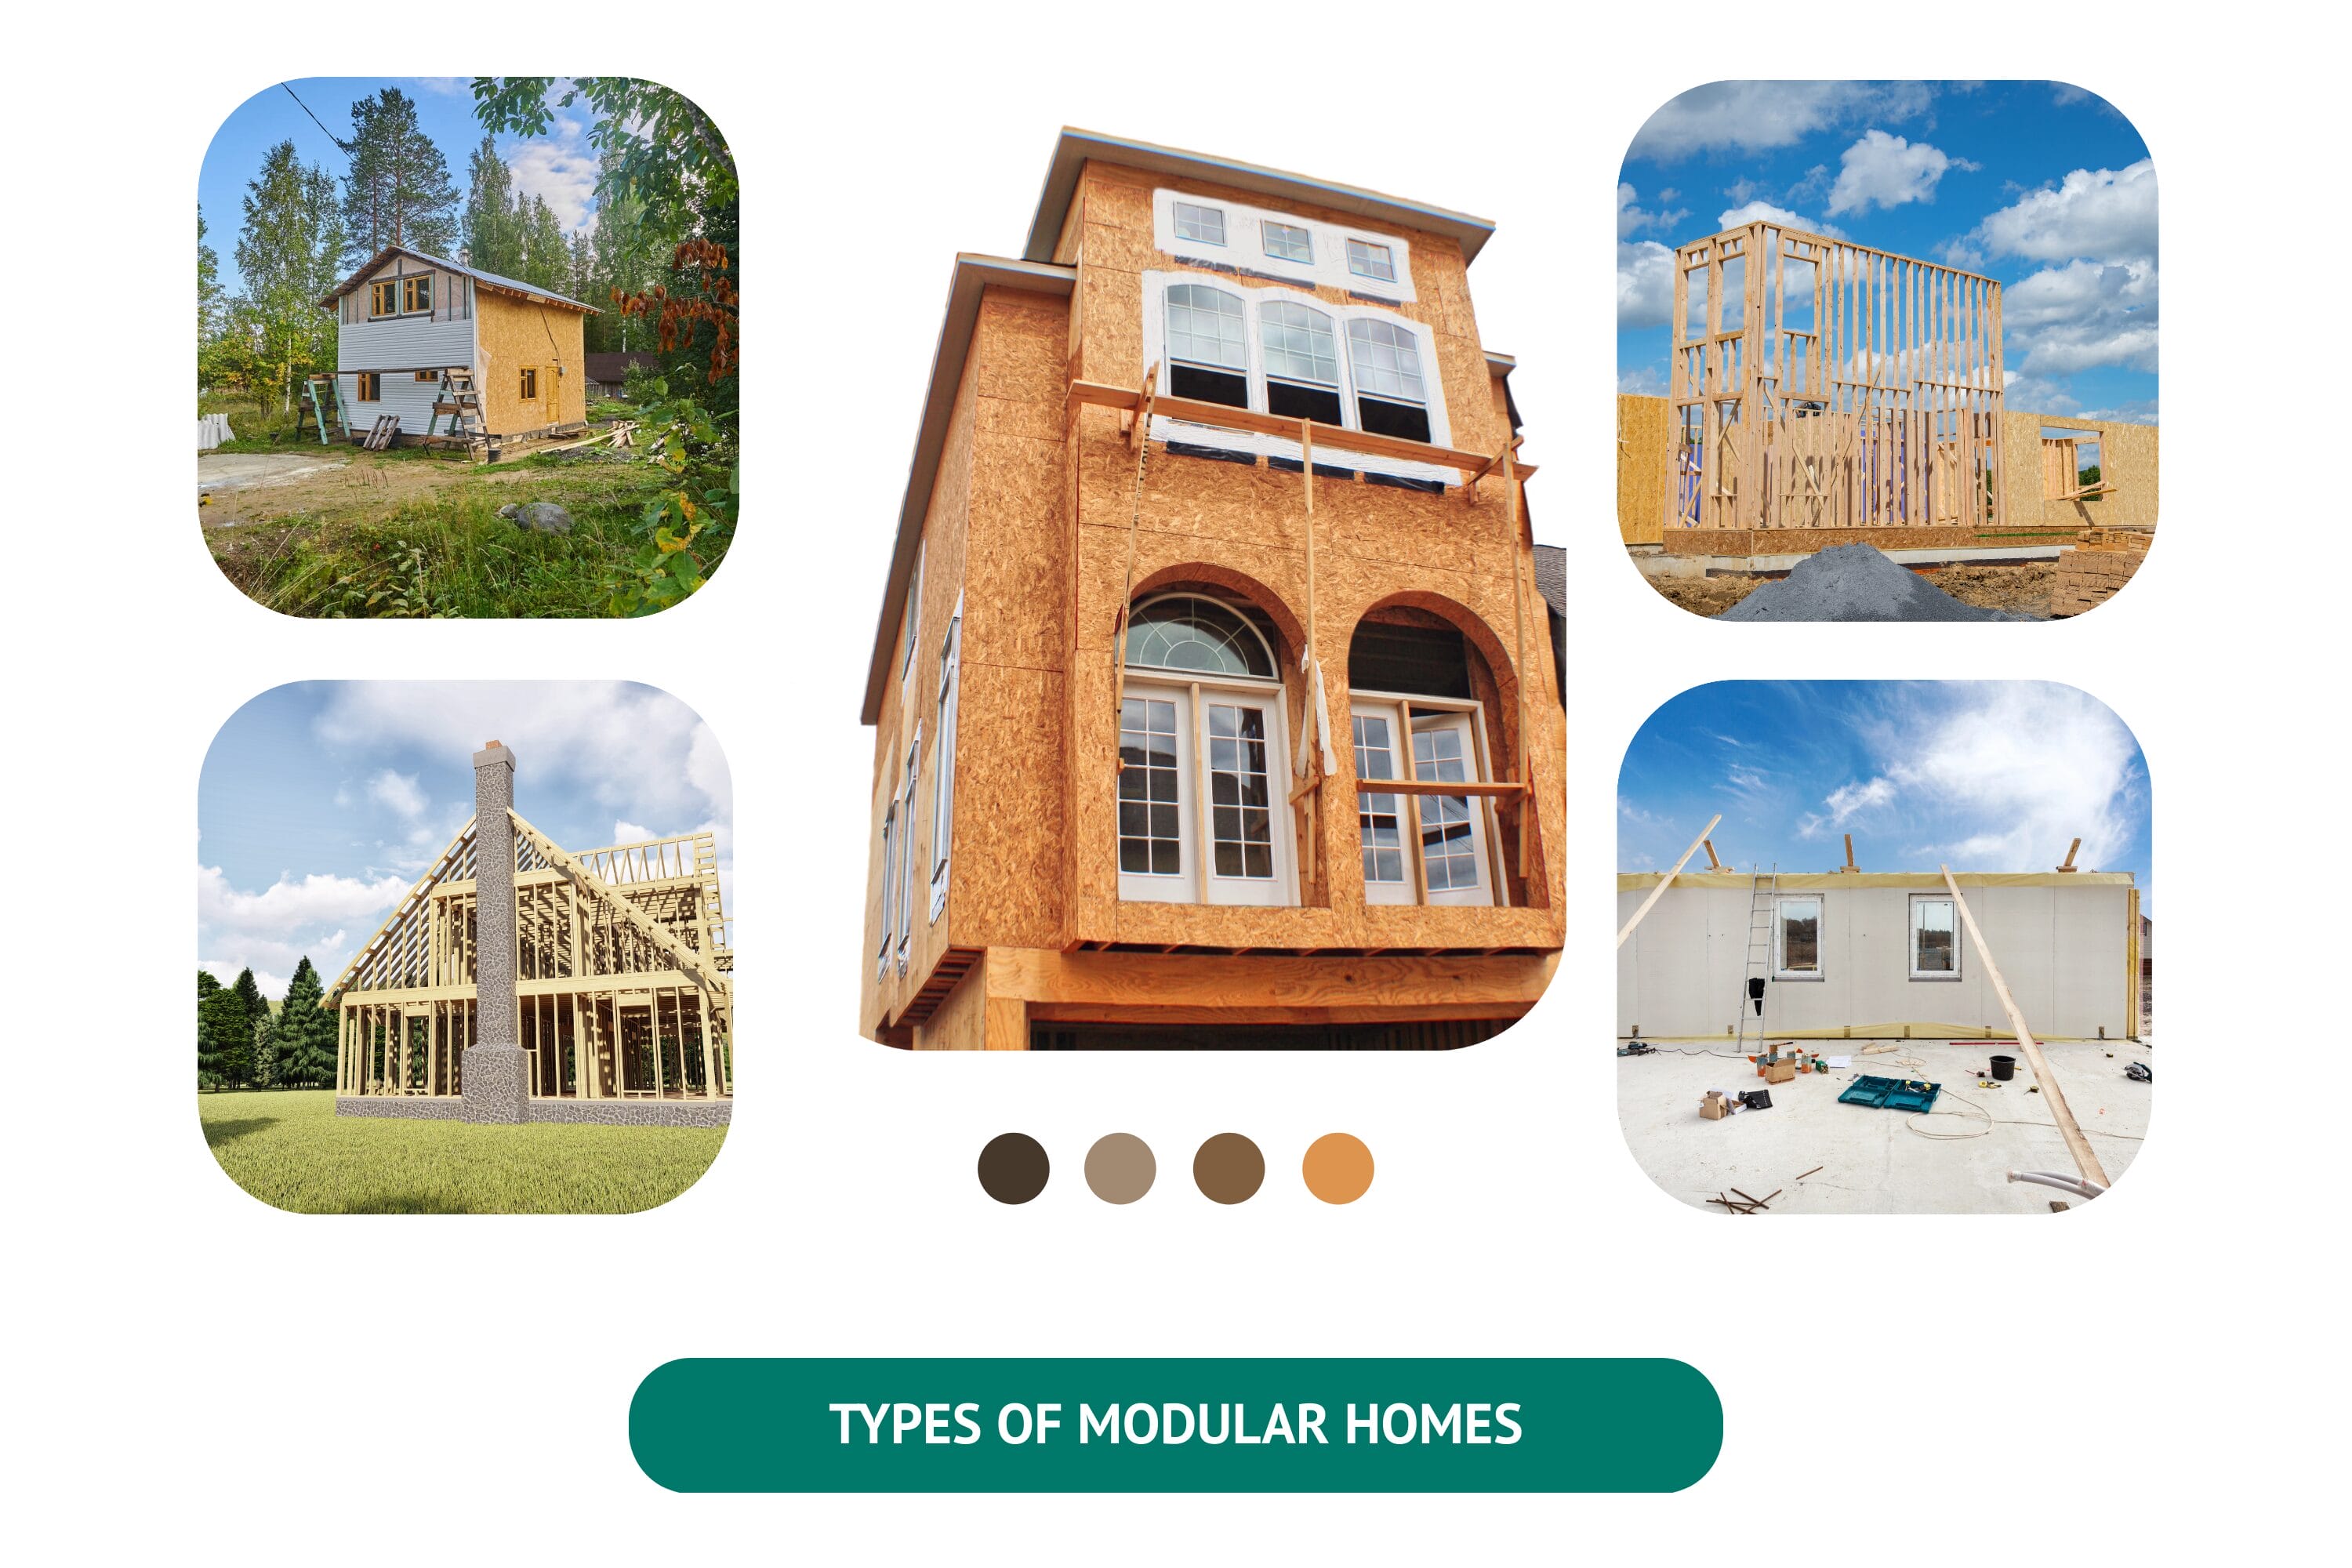 There are various types of modular homes available.